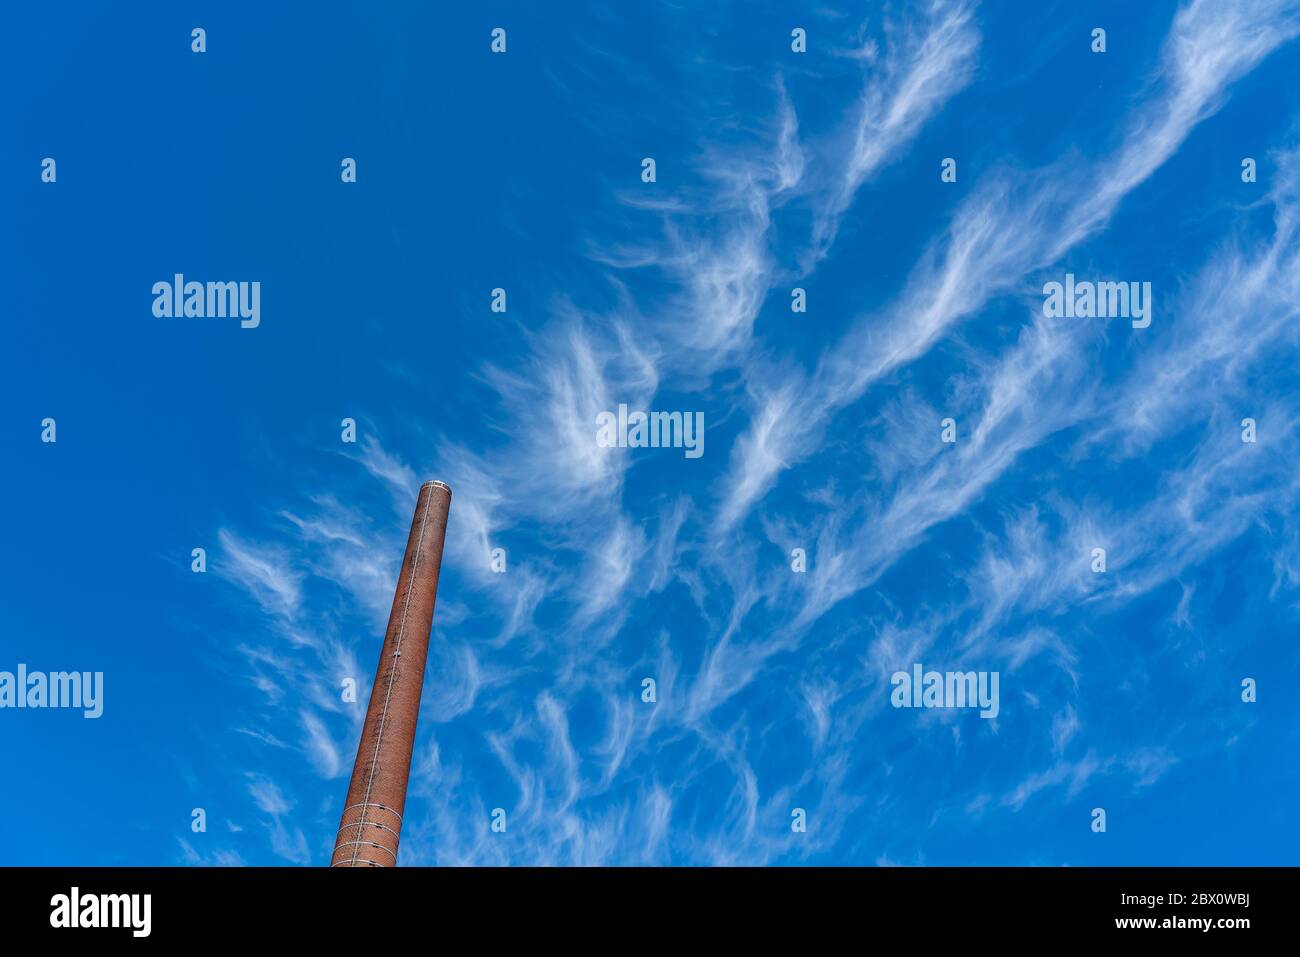 Blue sky with cirrus clouds, filigree ice clouds at high altitude, harbingers of warmer weather, chimneys, emissions Stock Photo